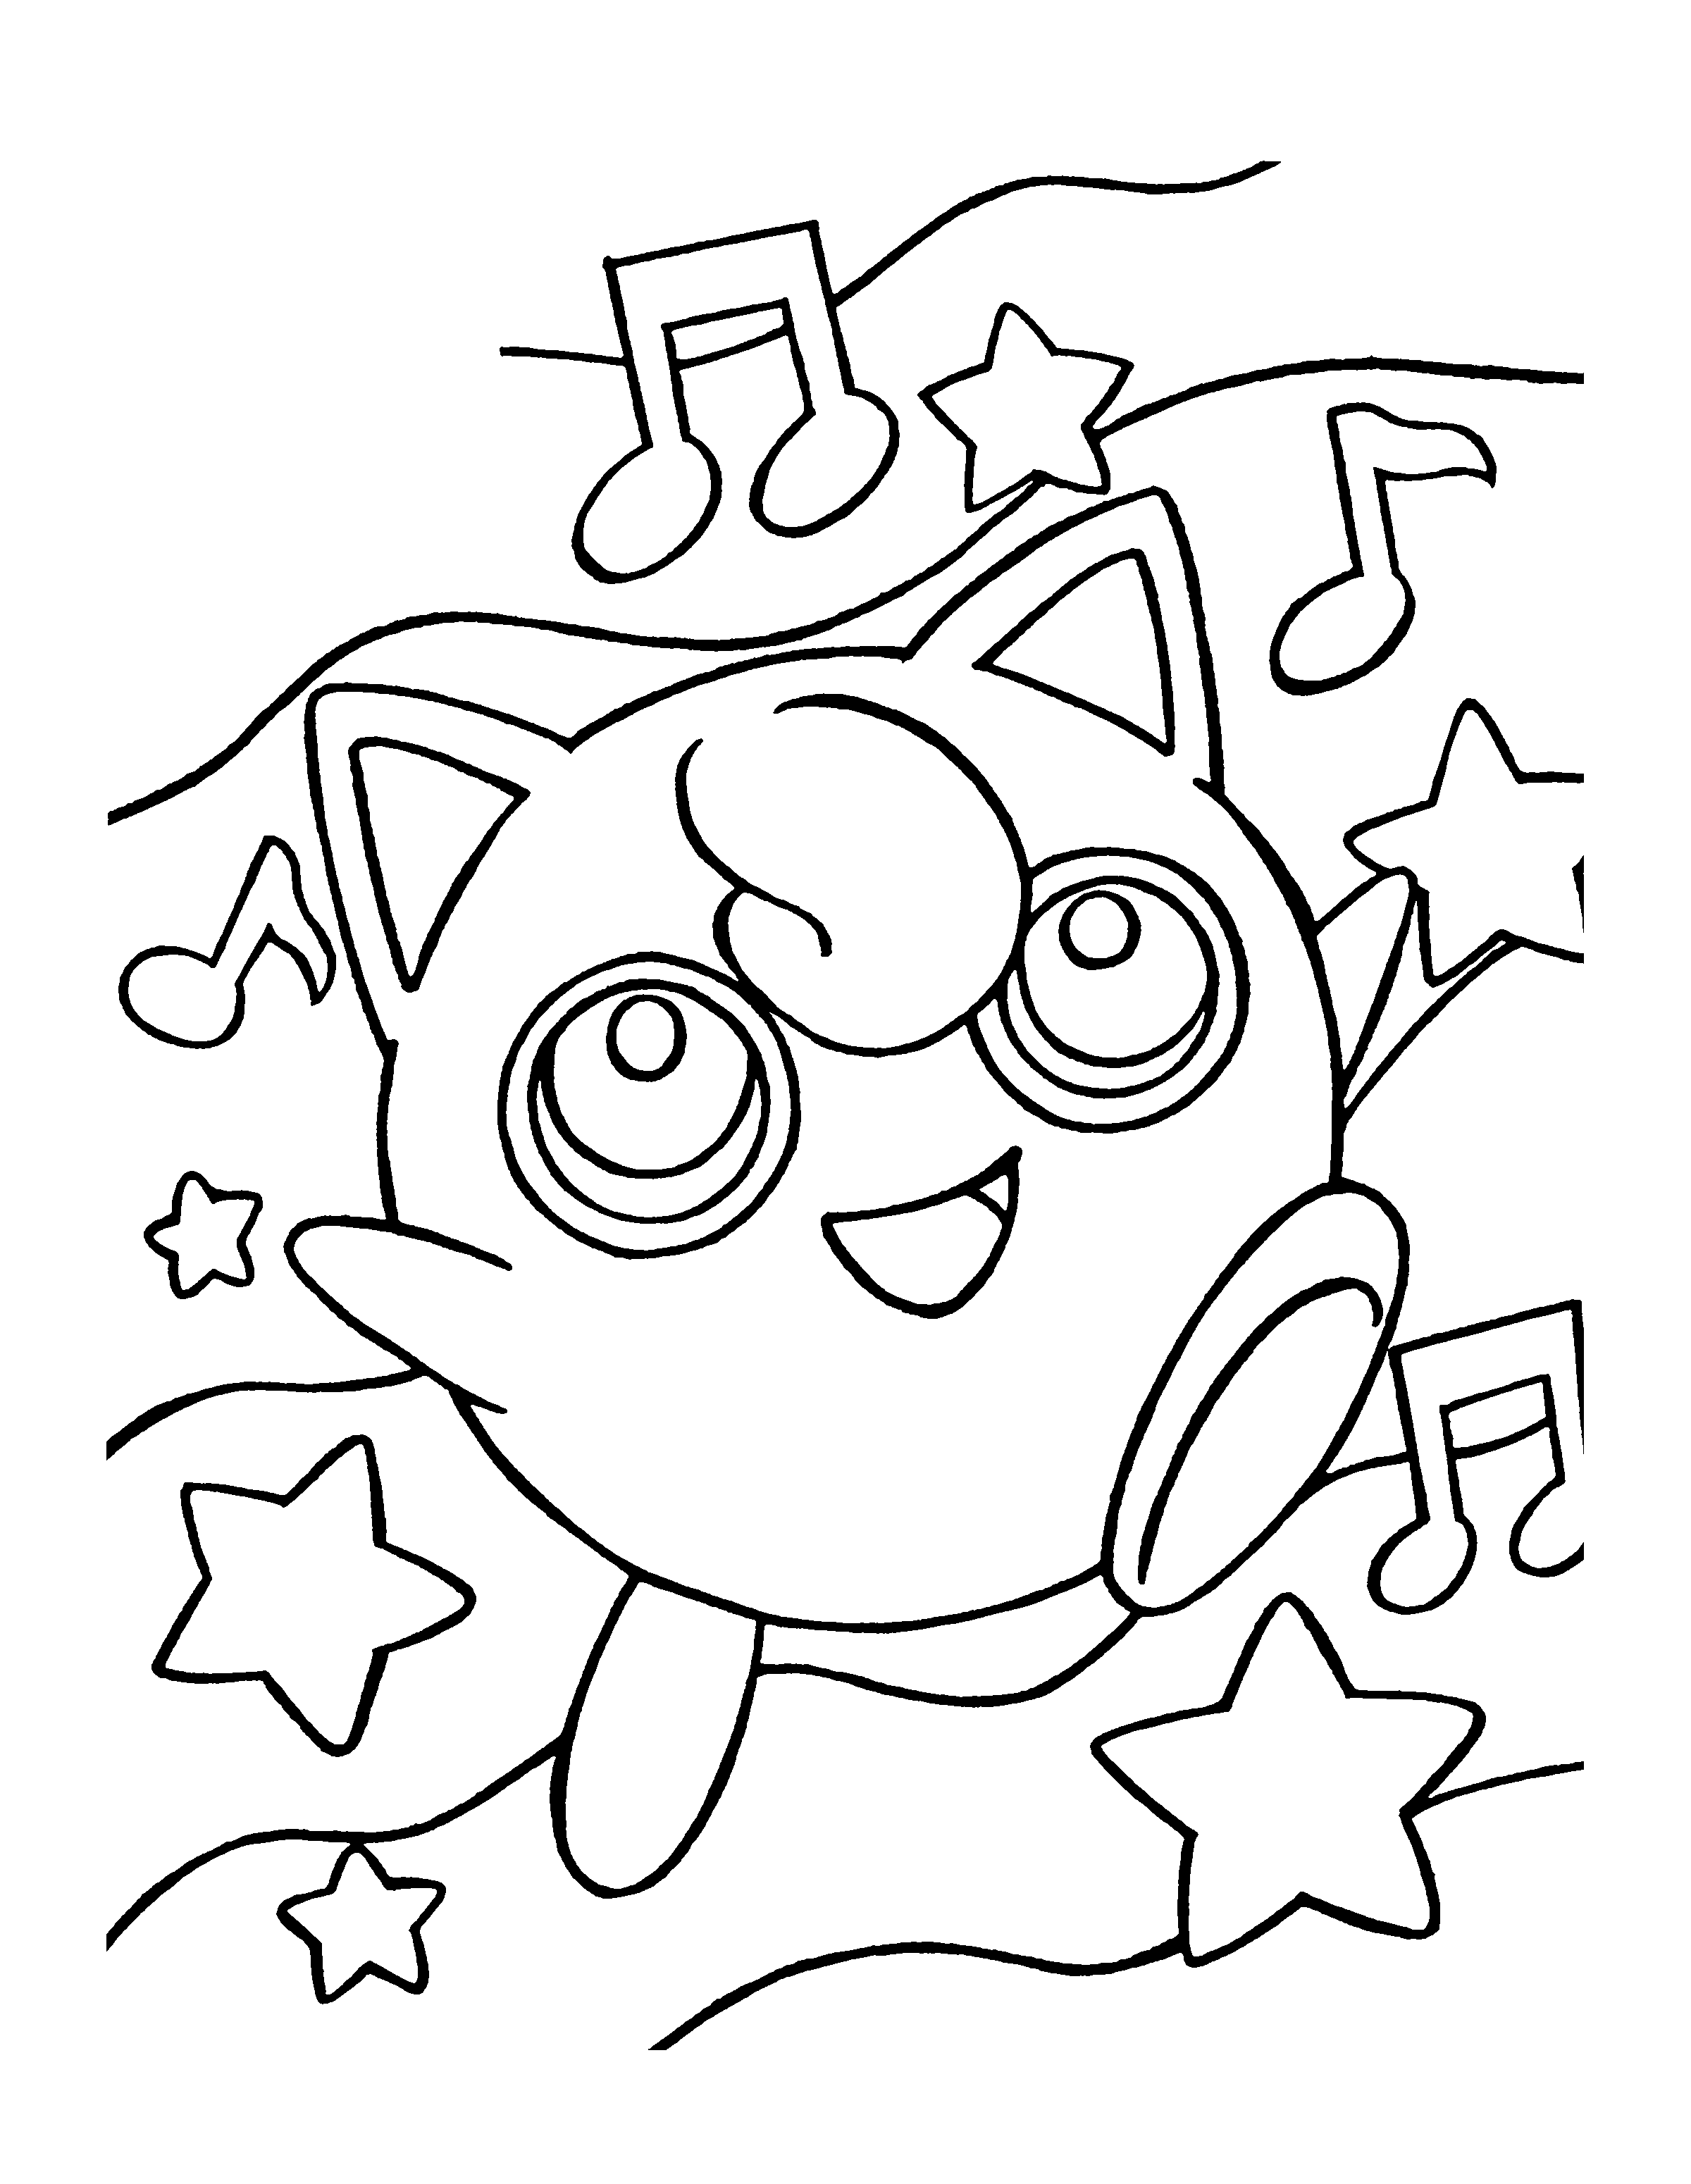 pokemon printable colouring pages all pokemon coloring pages download and print for free pokemon colouring pages printable 